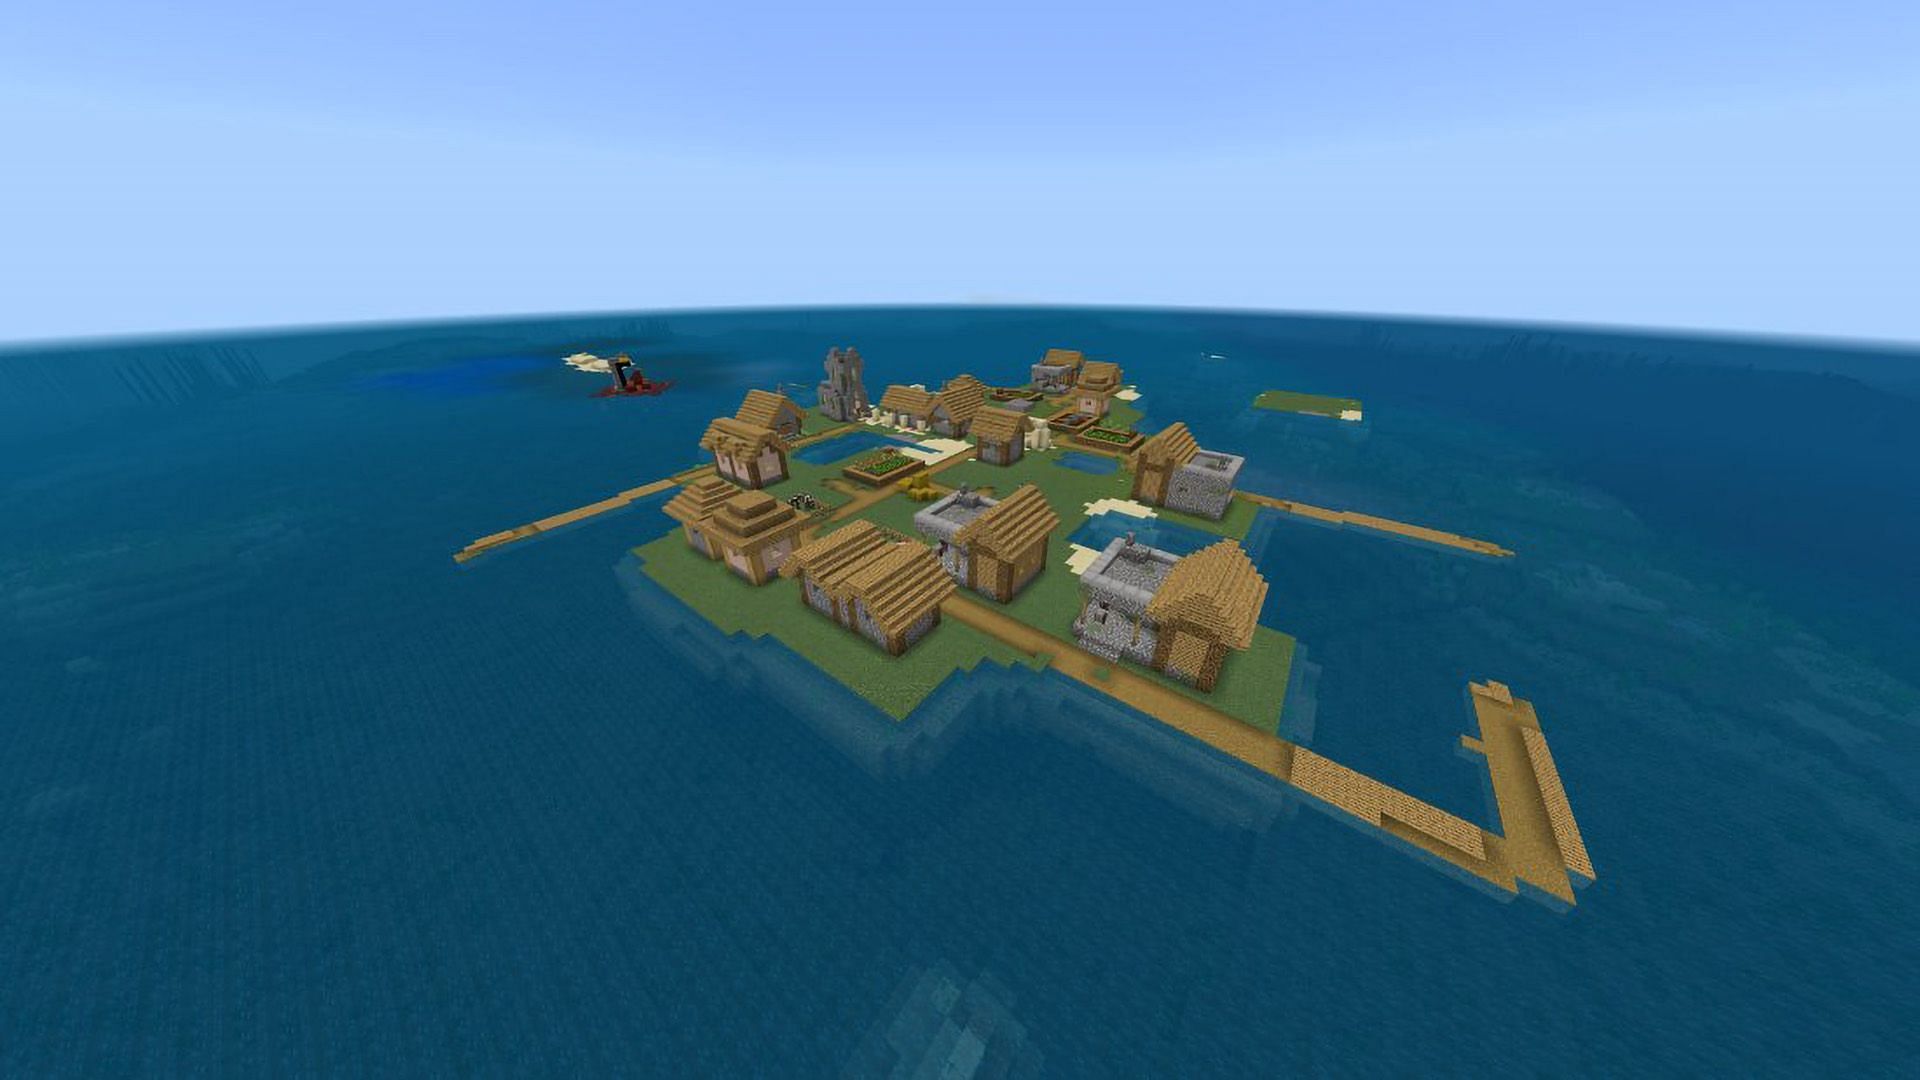 Speedrun from the Island without straying further (Image via Mojang)